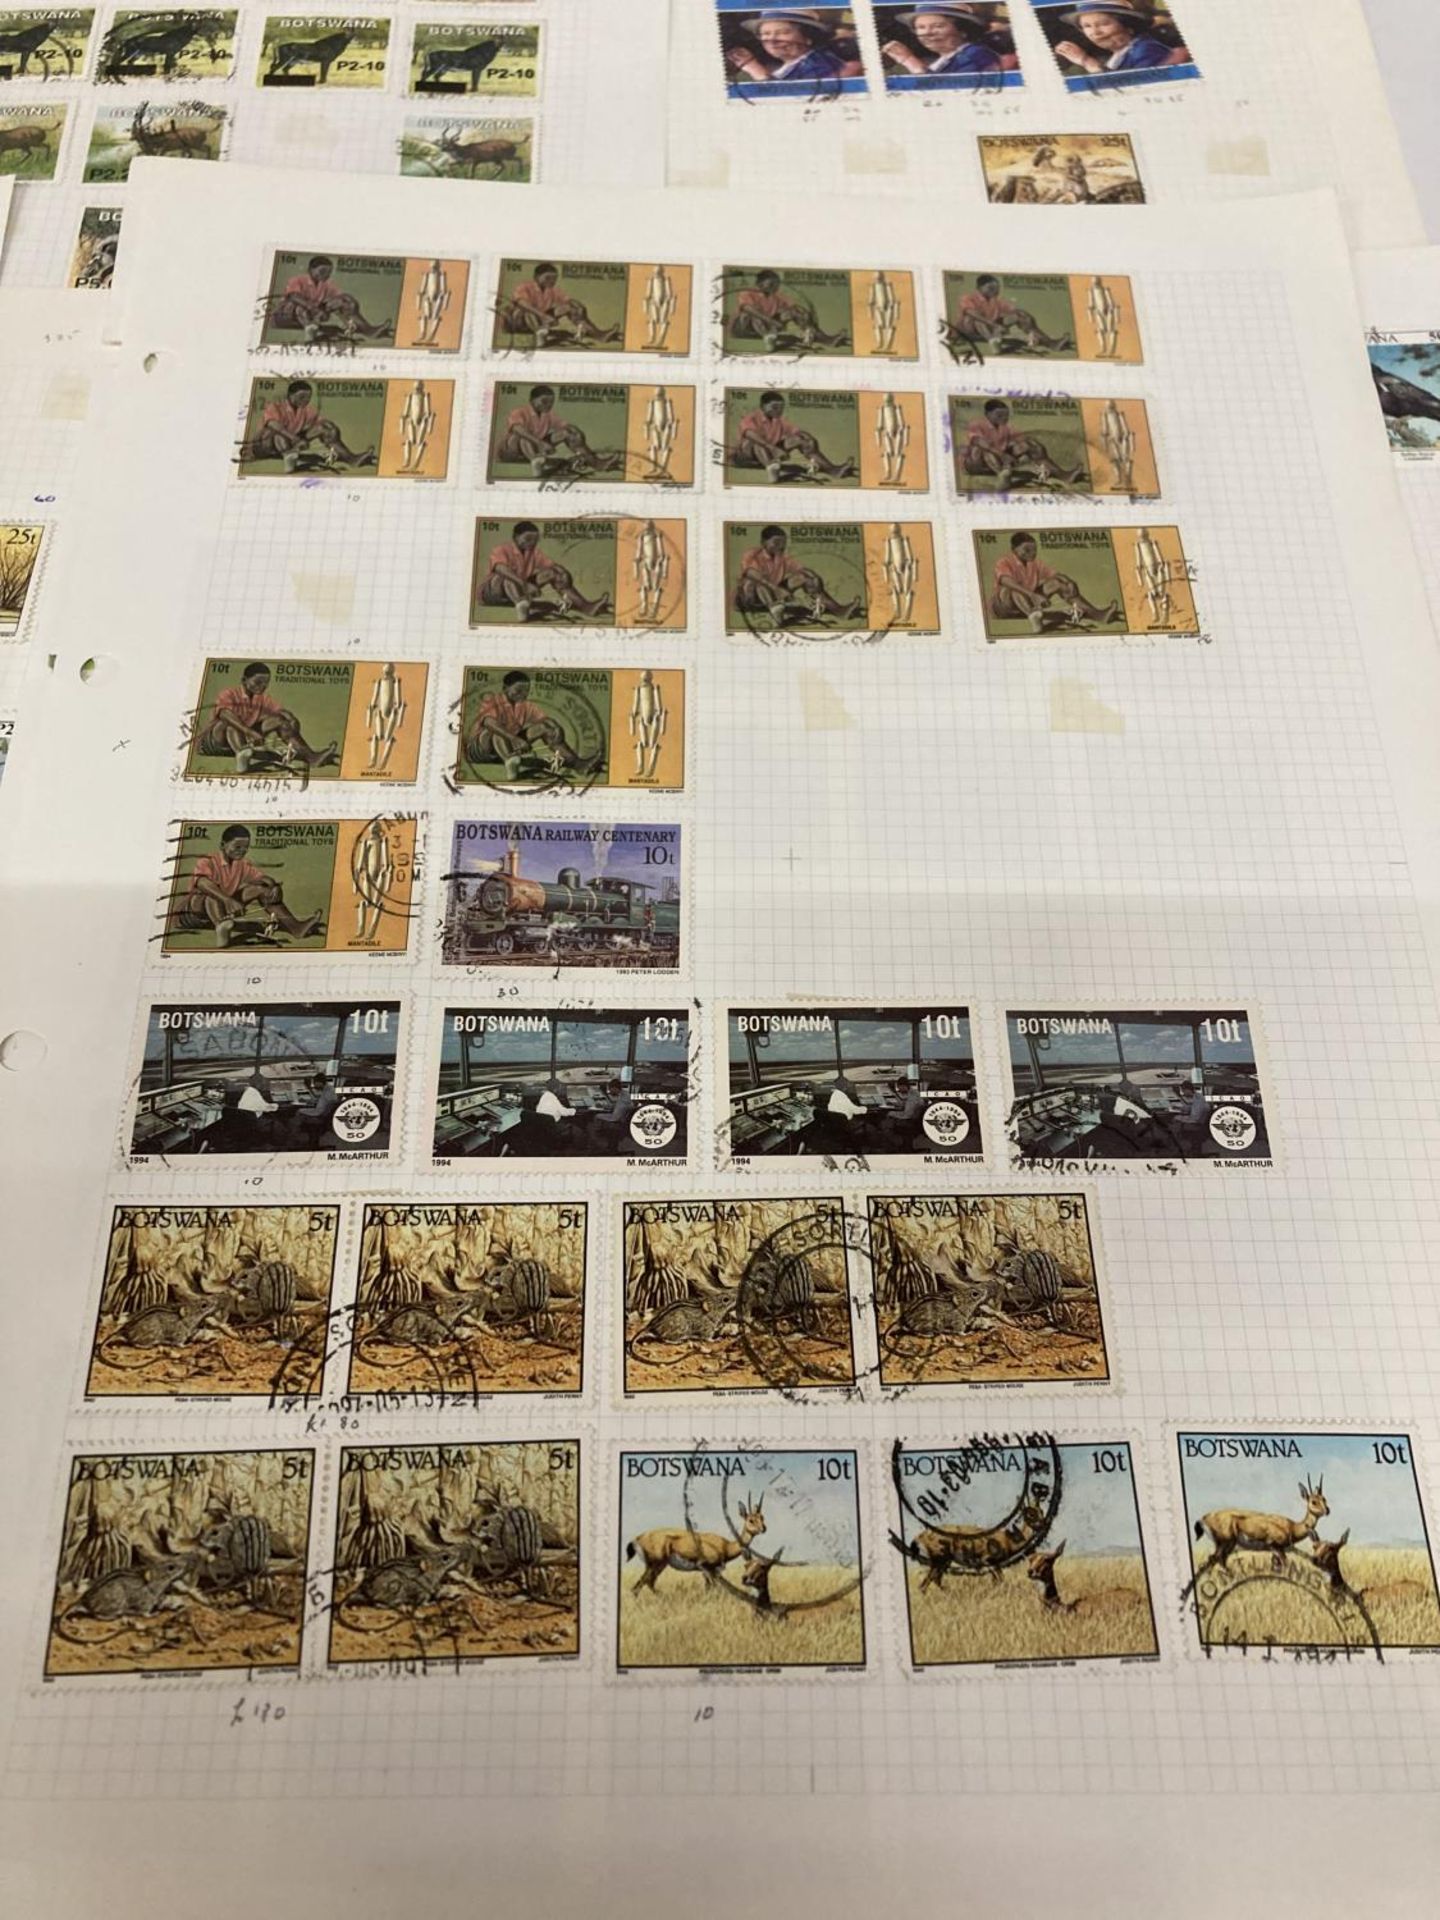 TEN PLUS SHEETS CONTAINING STAMPS FROM BOTSWANA - Image 3 of 6